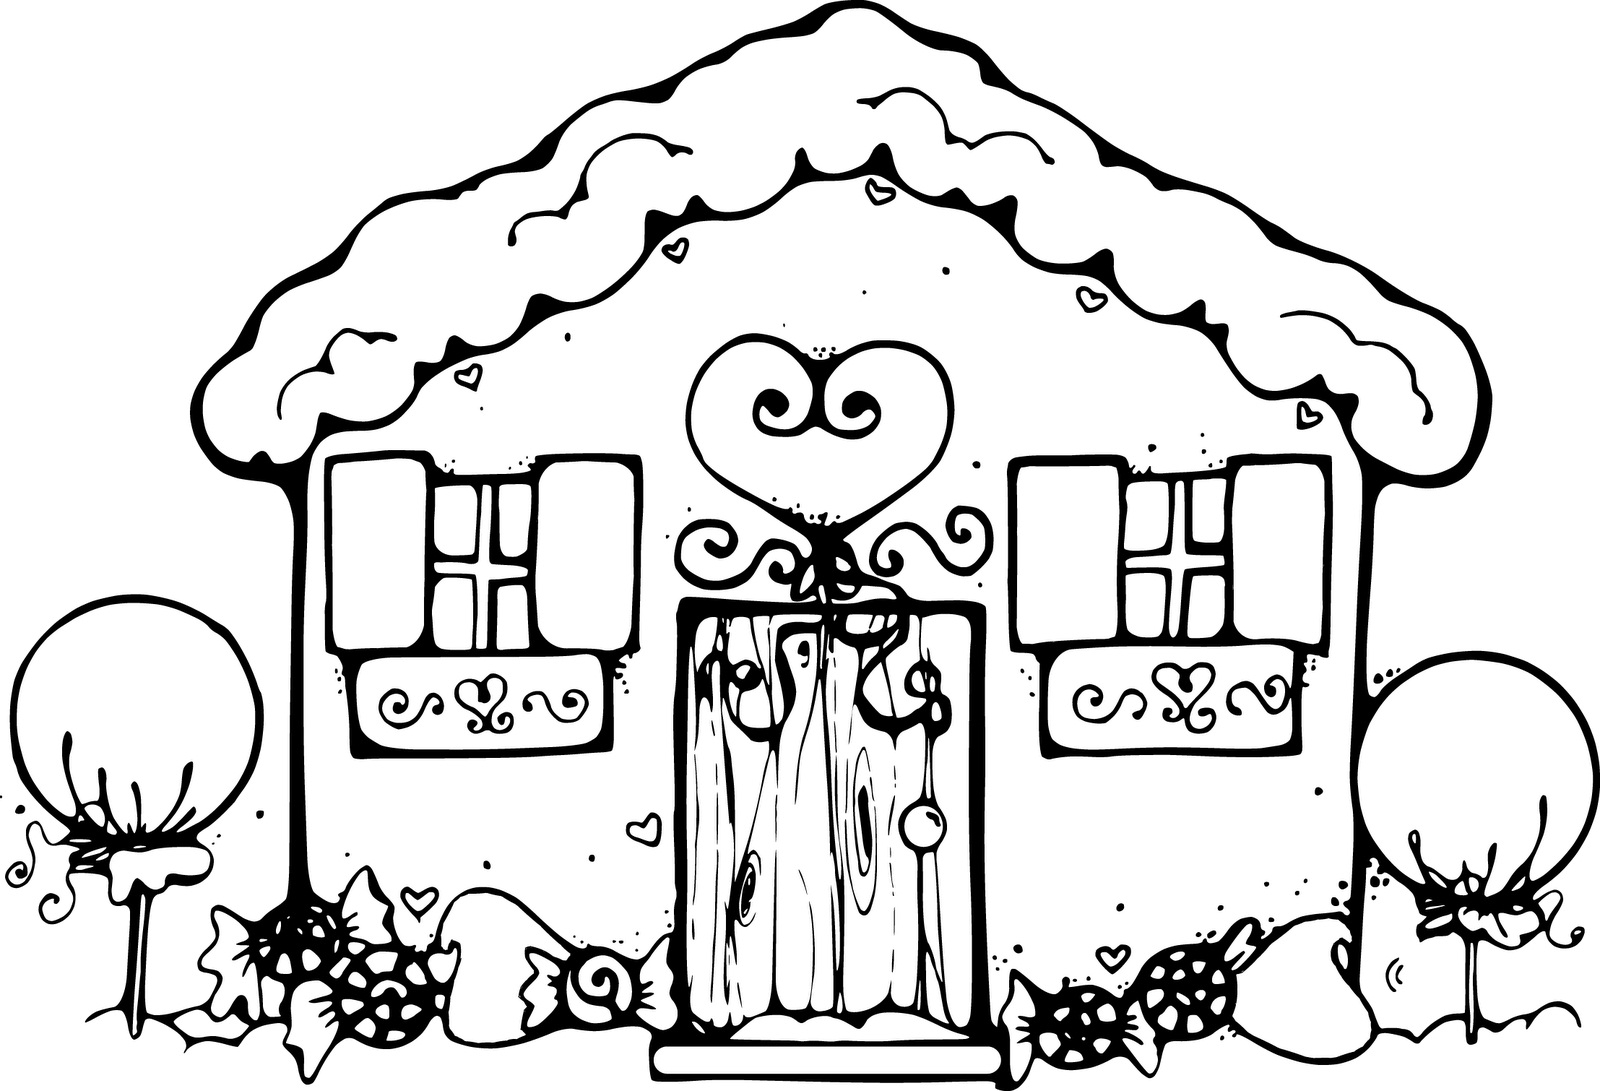 647 Animal Little House On The Prairie Coloring Pages for Kids